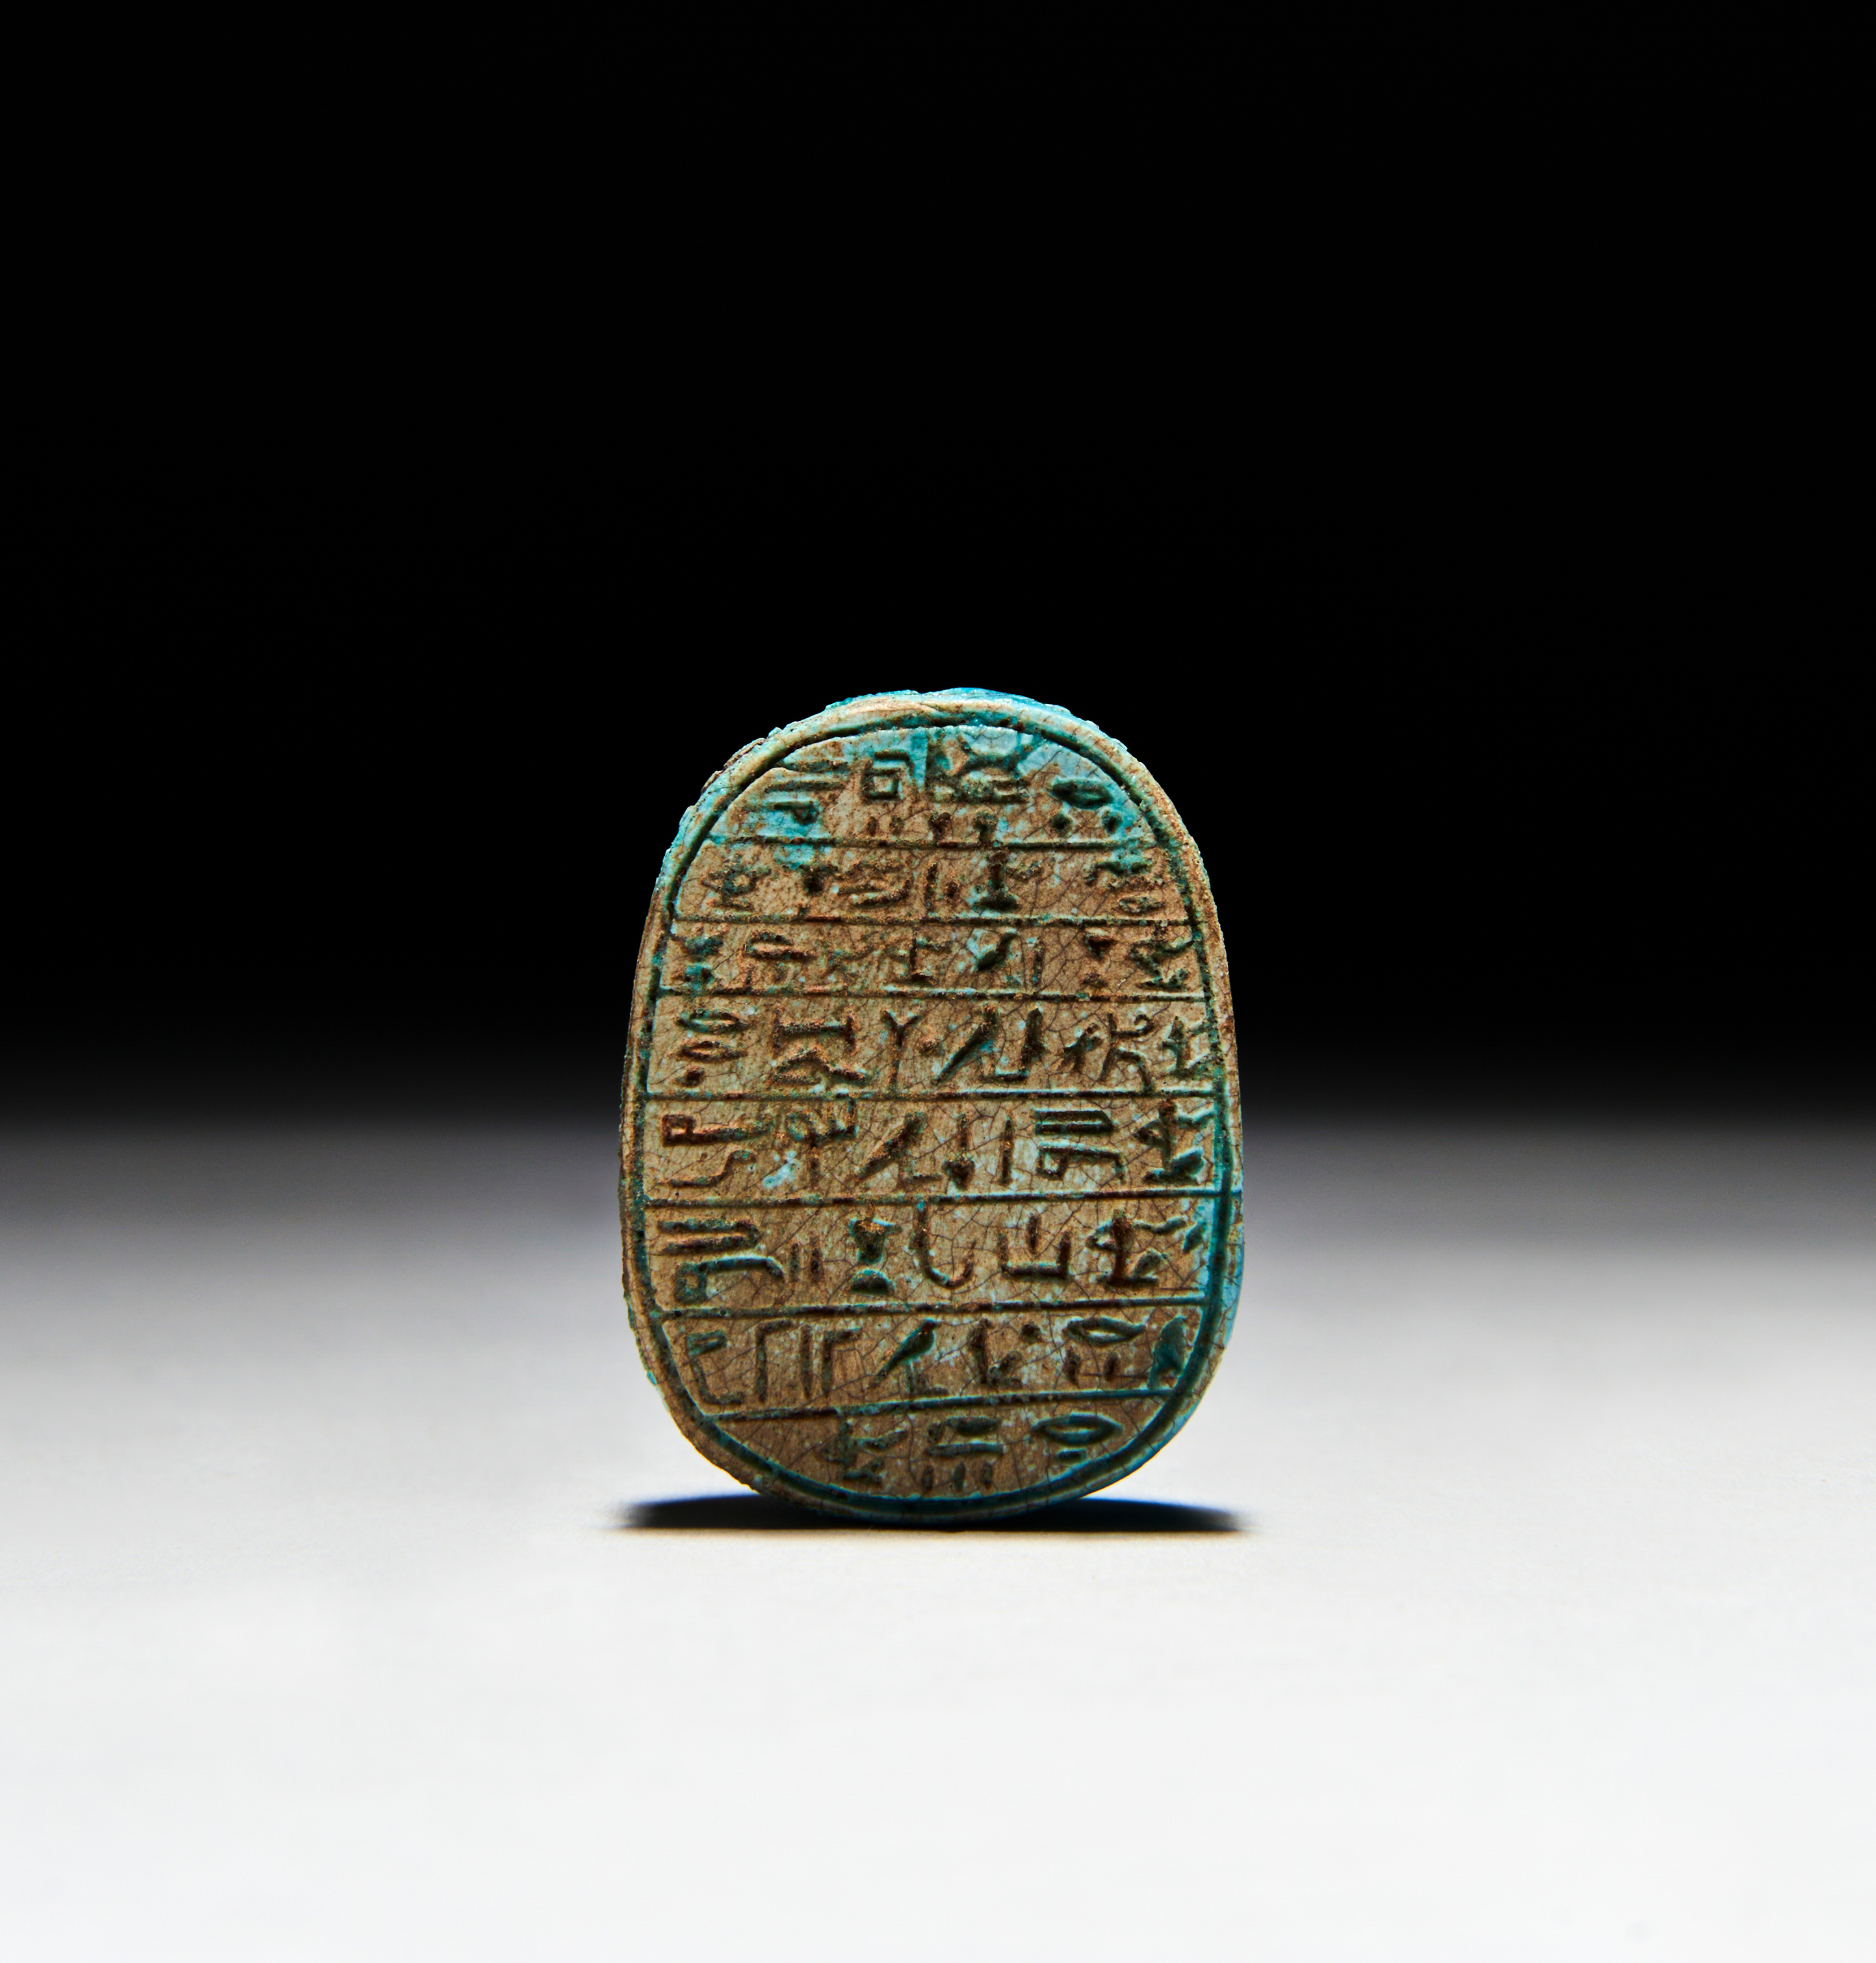 AN INSCRIBED EGYPTIAN TURQUOISE FAIENCE SCARAB PTOLEMAIC PERIOD (332-30 B.C.) - Image 2 of 2